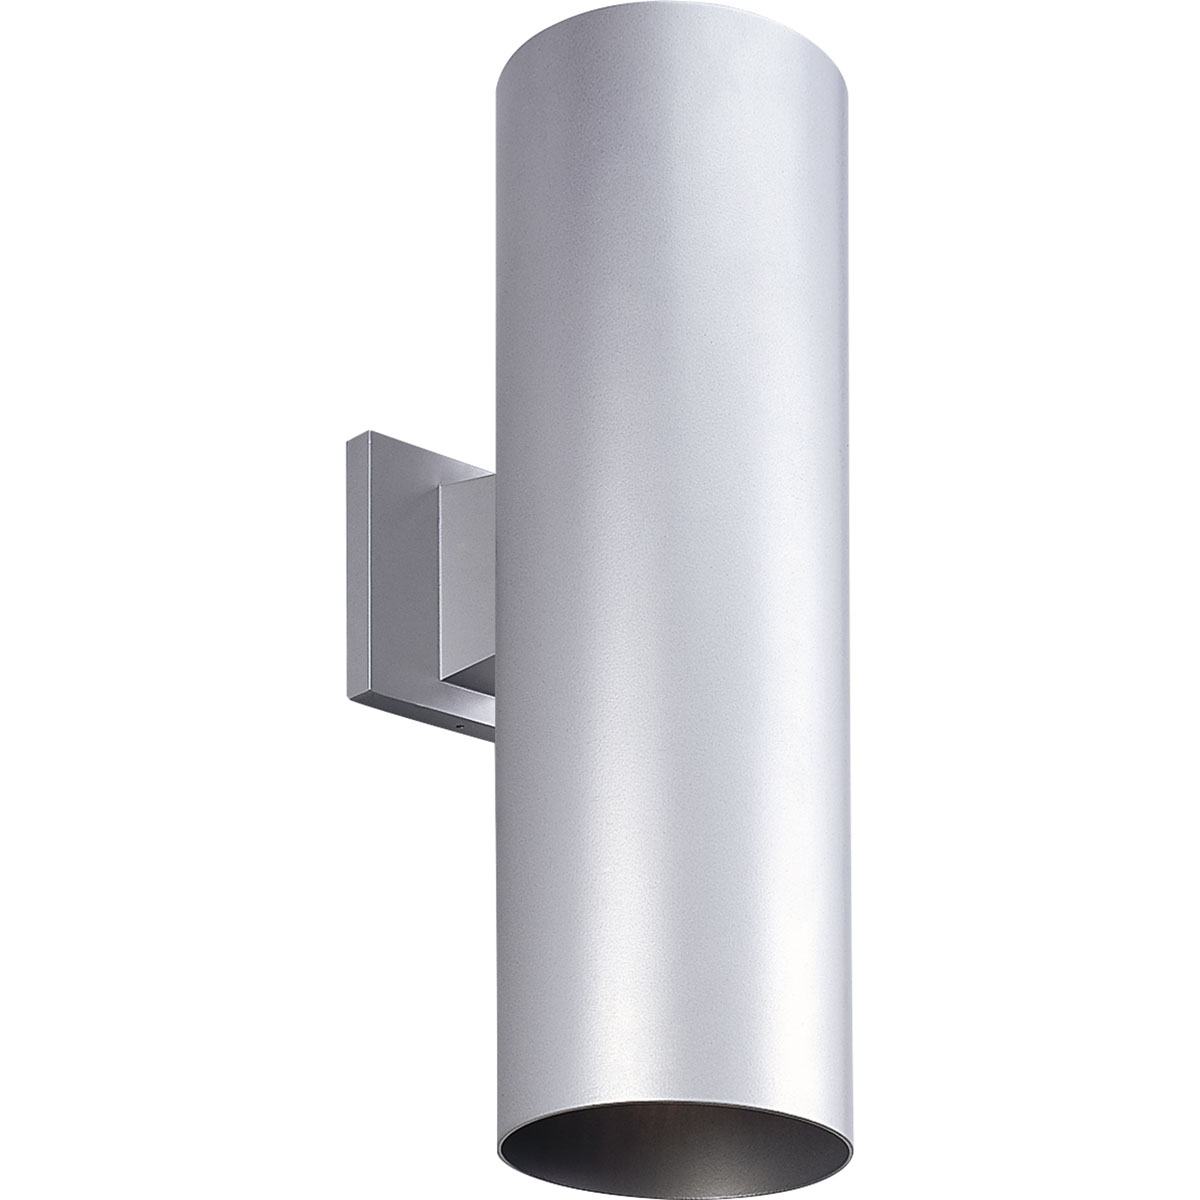 6 in uplight/downlight wall cylinders are ideal for a wide variety of interior and exterior applications including residential and commercial. The aluminum Cylinders offers a contemporary design with its sleek cylindrical form and elegant fade and chip resistant Metallic Gray finish, perfect for today's inspired exteriors. With over 2,150 lumens both up and down the LED Cylinders unite performance, energy savings and safety benefits. Provides even illumination up and down. Specify P860046 top cover lens for use in wet locations.